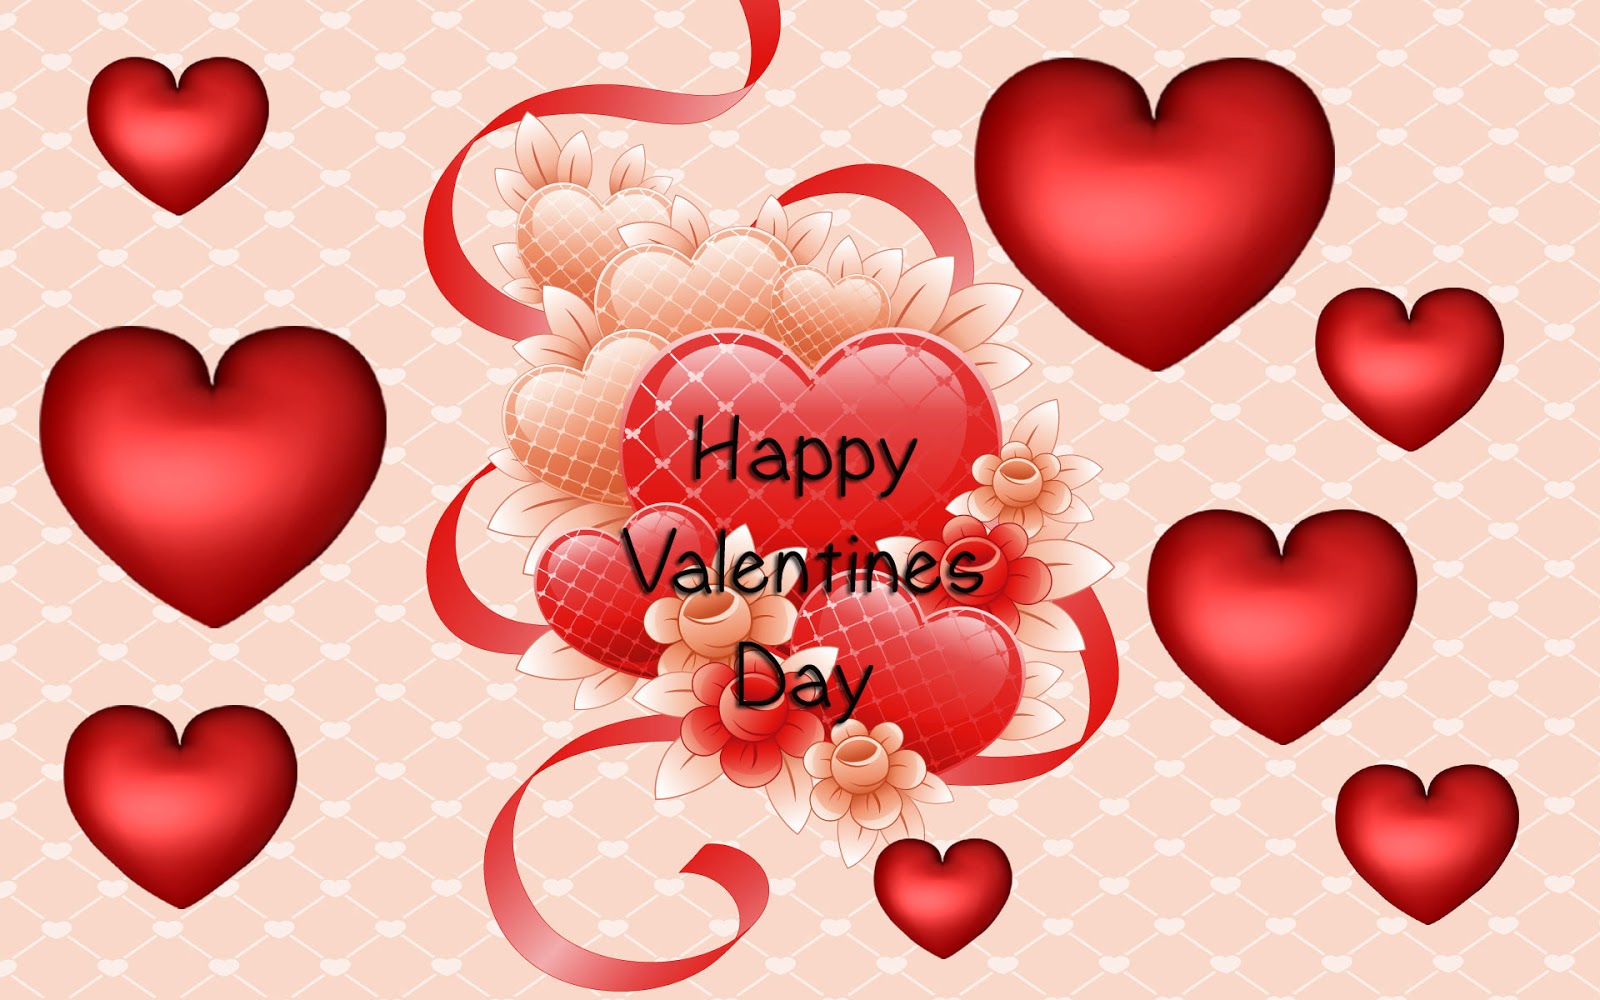 Online Wallpapers Shop Valentines Day Wallpaper, Photos 14th Feb 2013